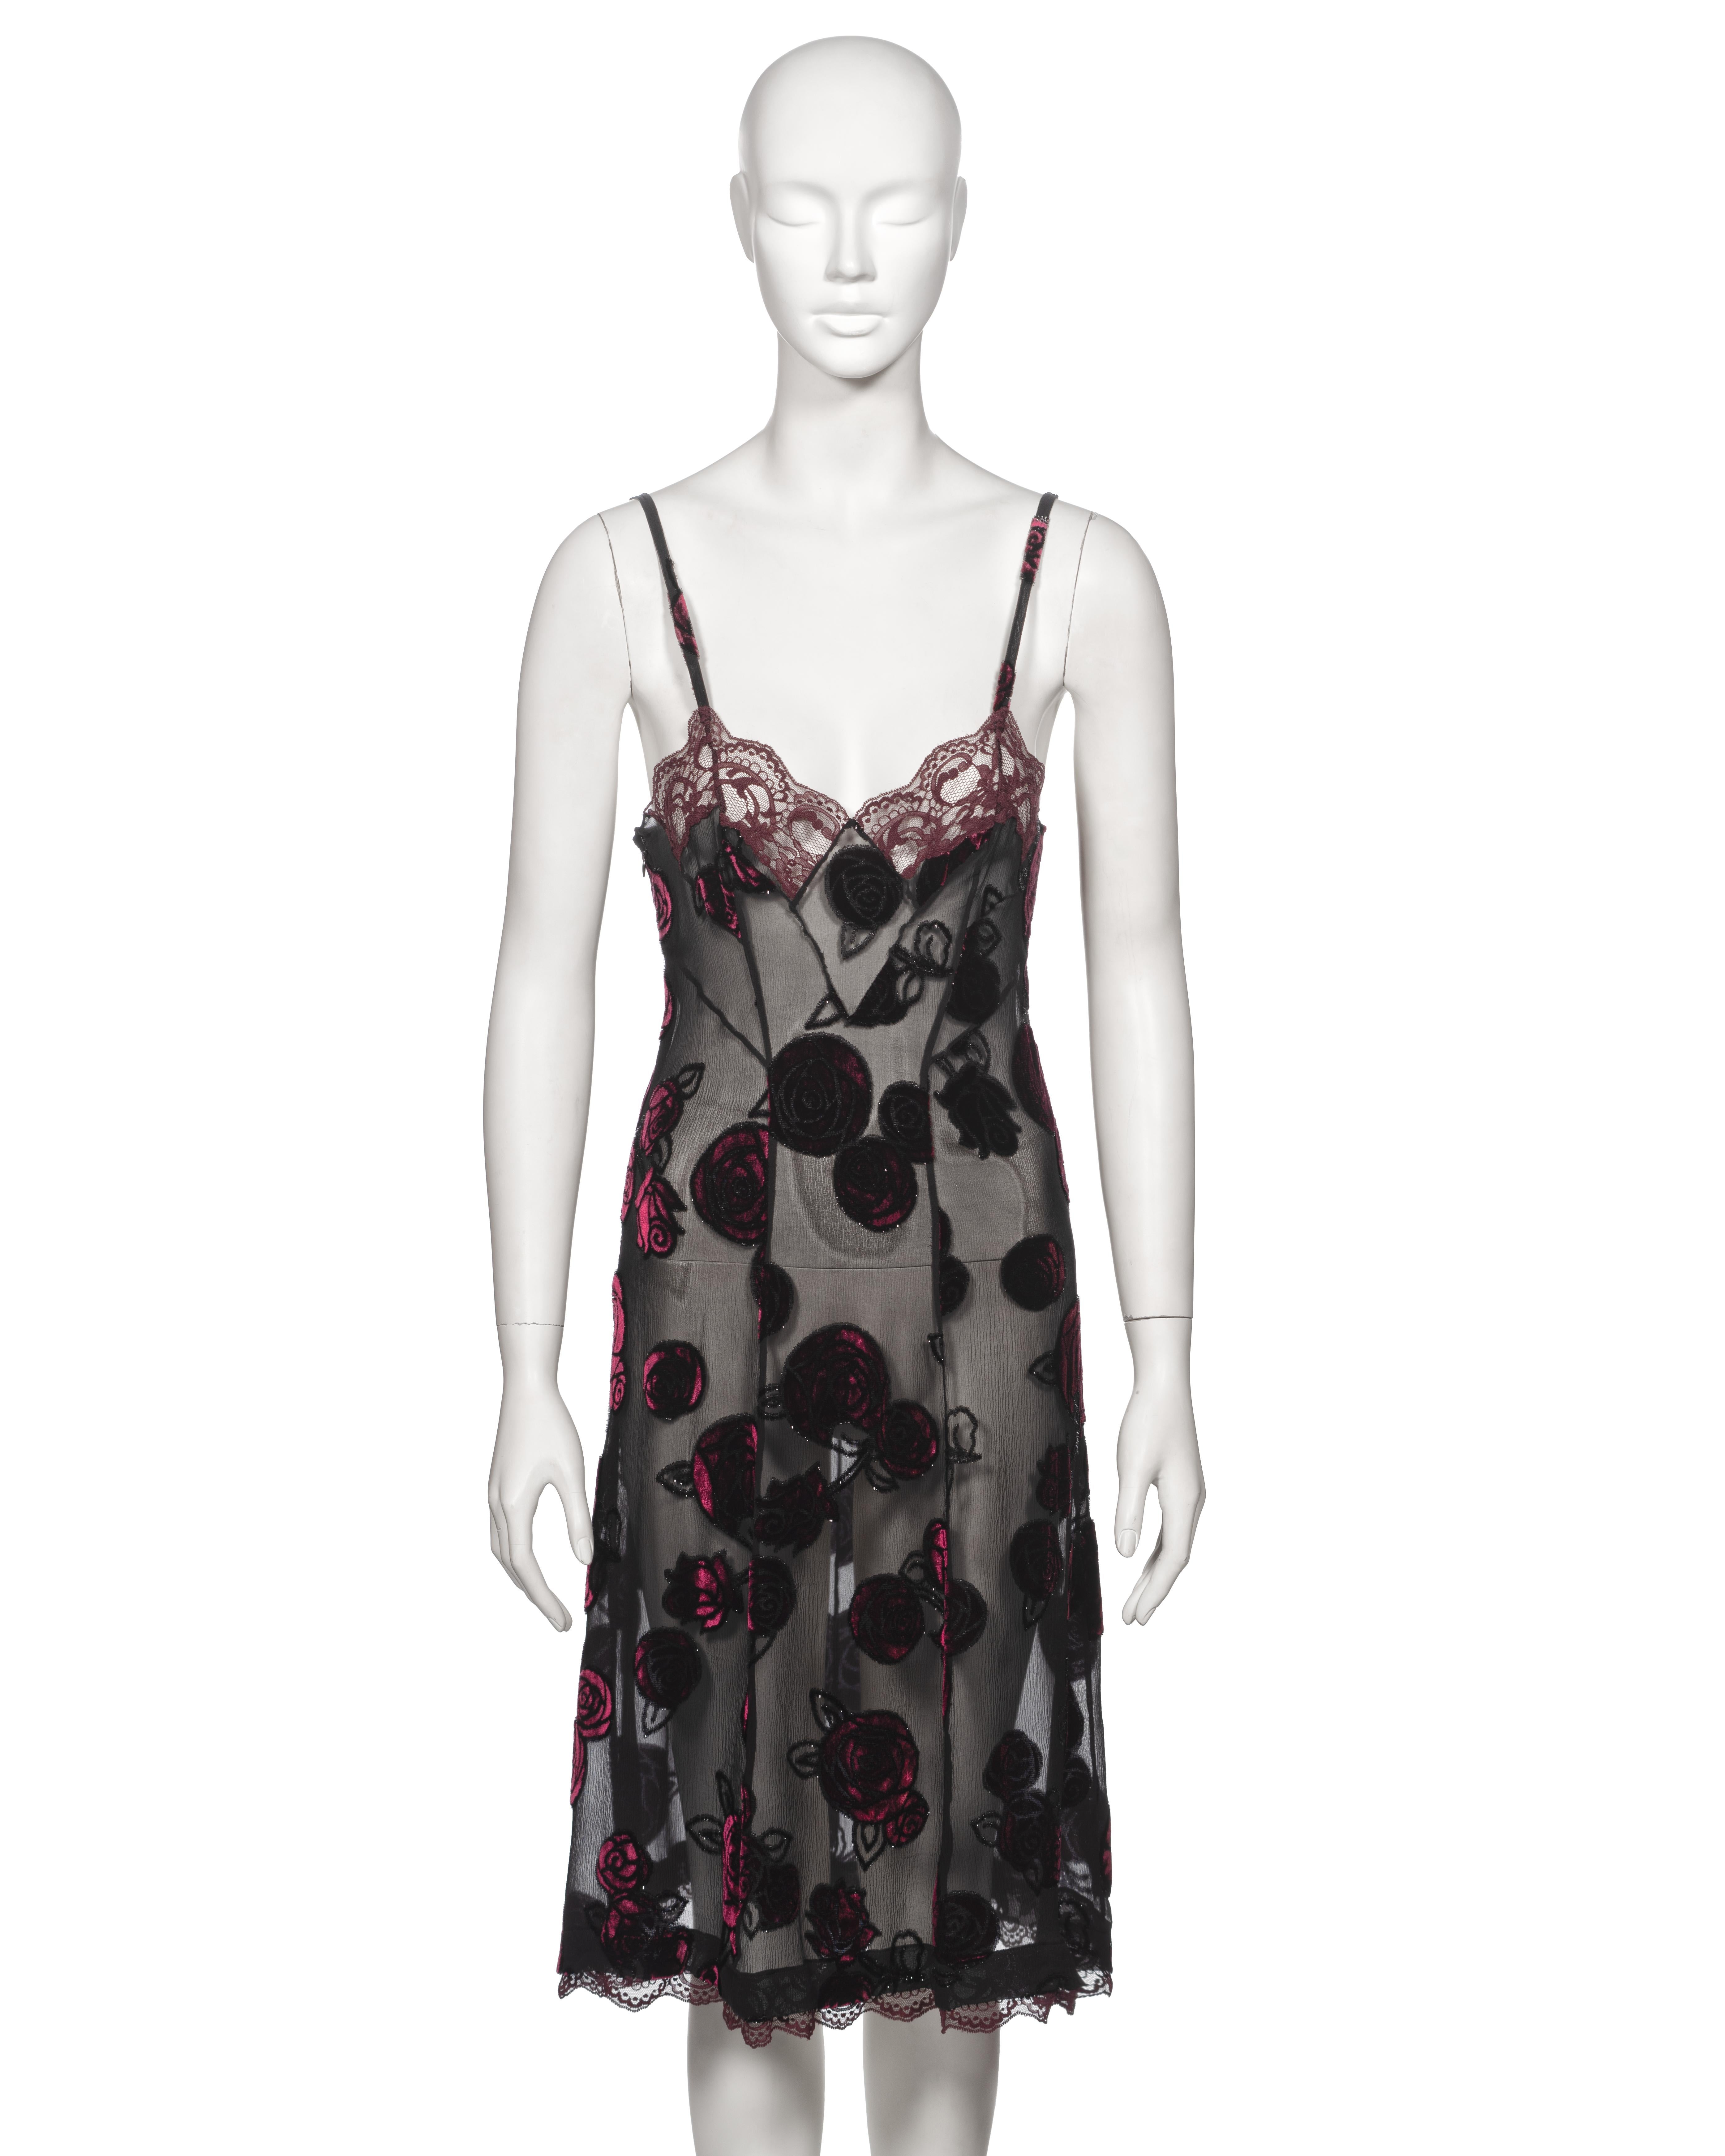 Christian Dior by John Galliano Double Layered Bordeaux Slip Dress, FW 2005 For Sale 2